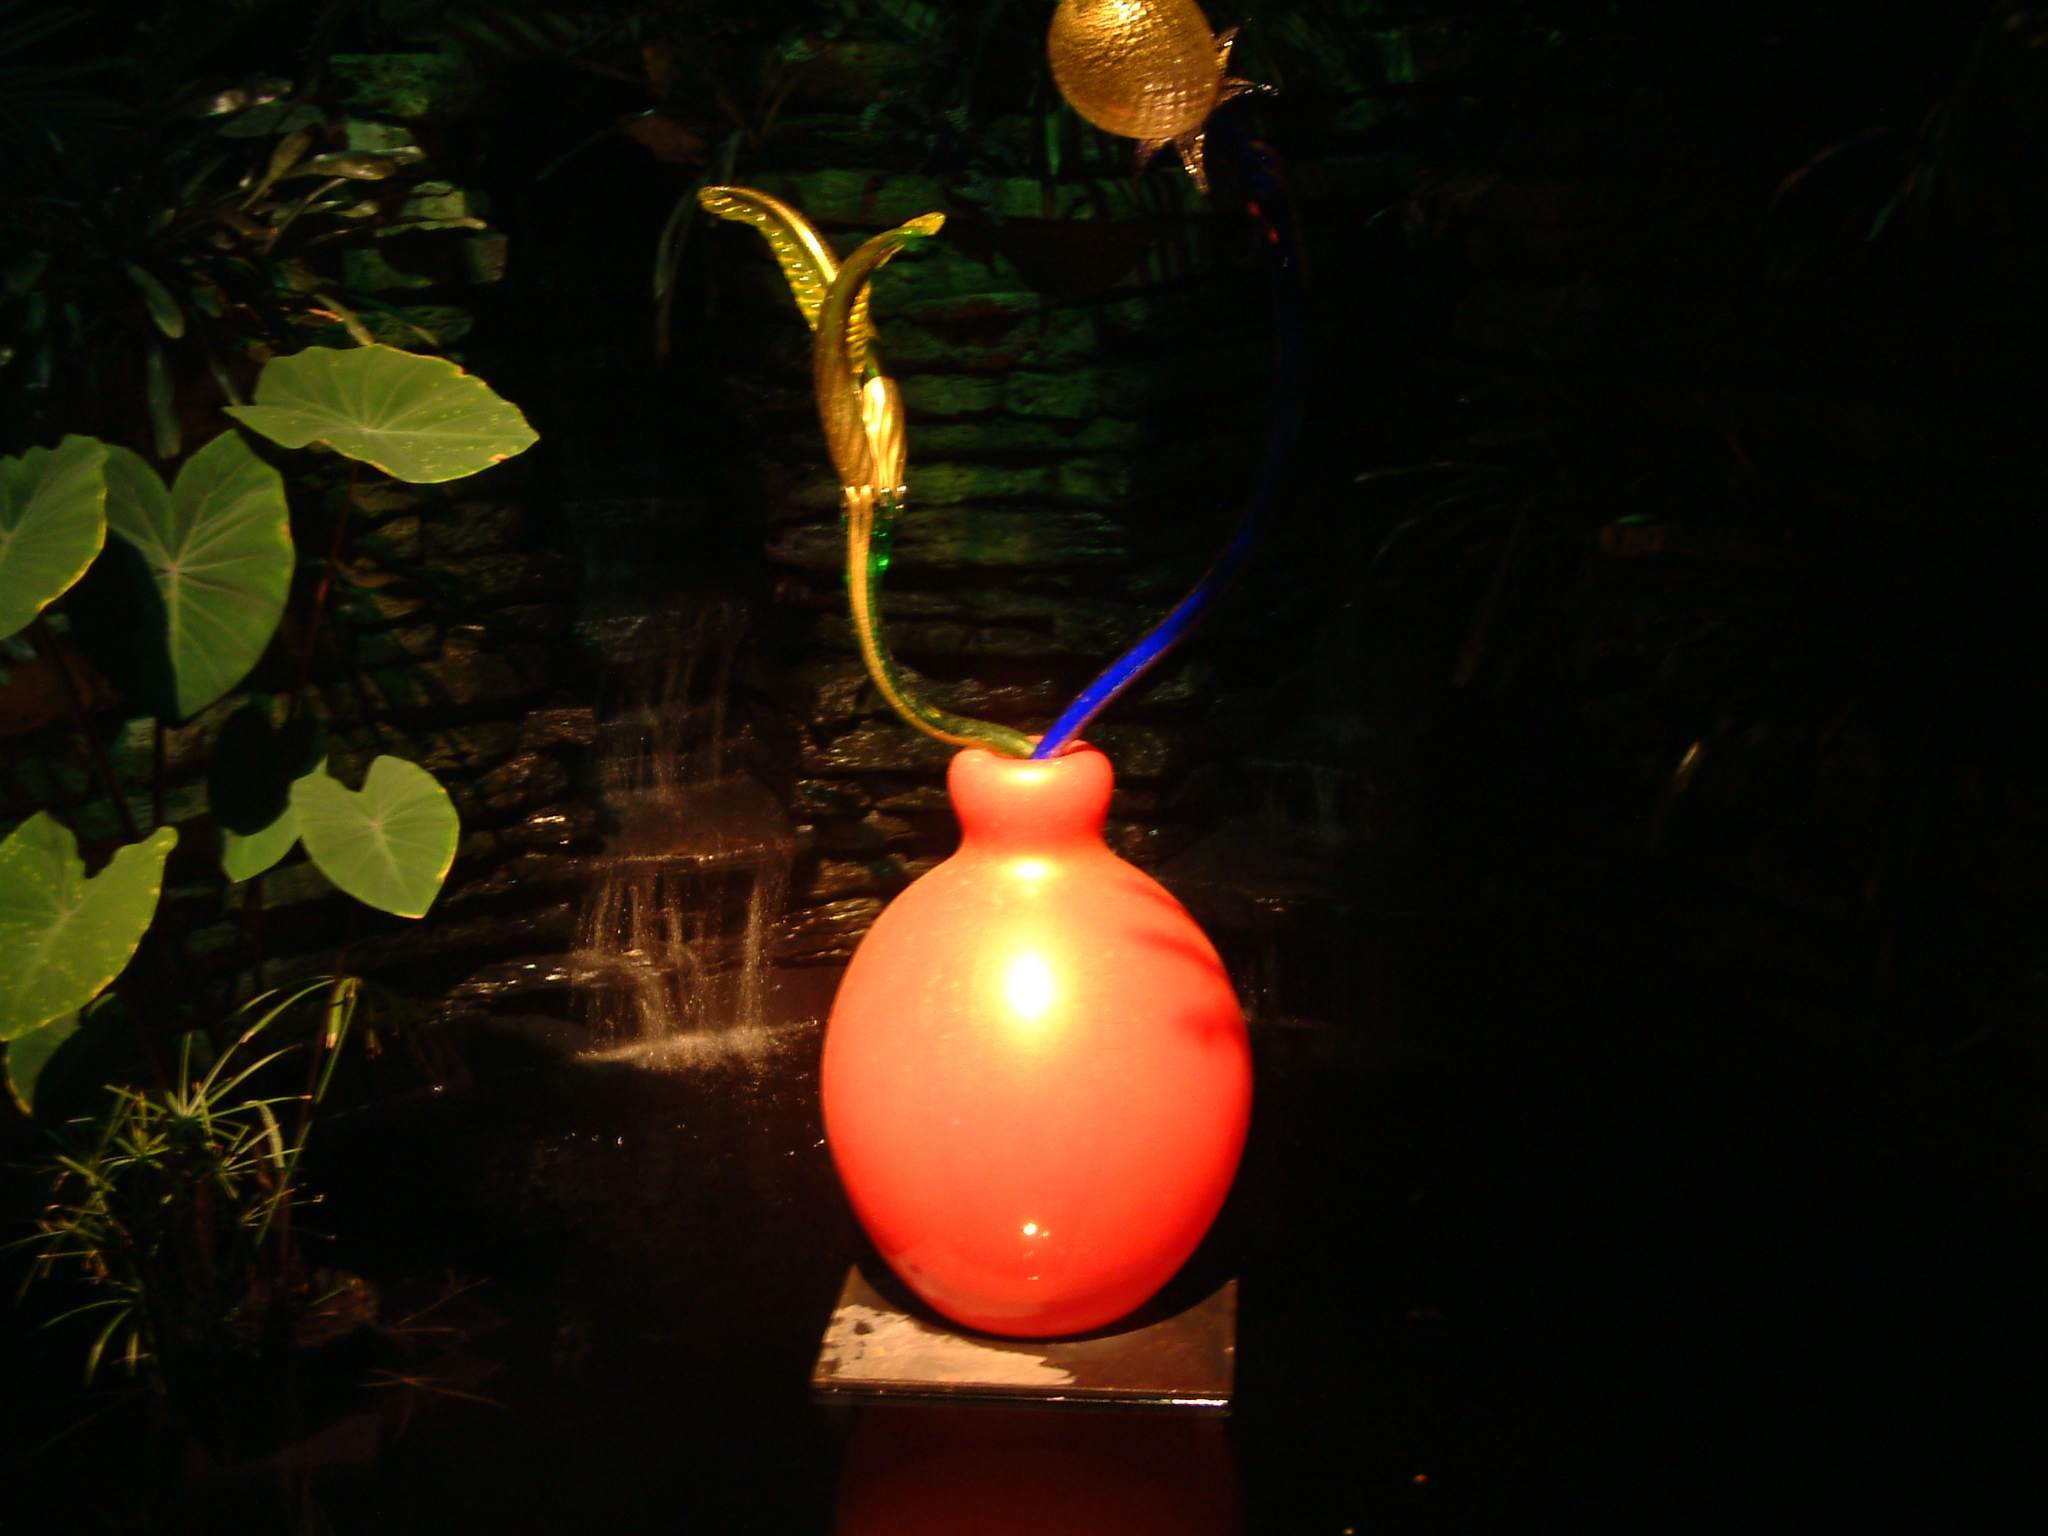 Dale Chihuly at Garfield Park Conservatory, Chicago